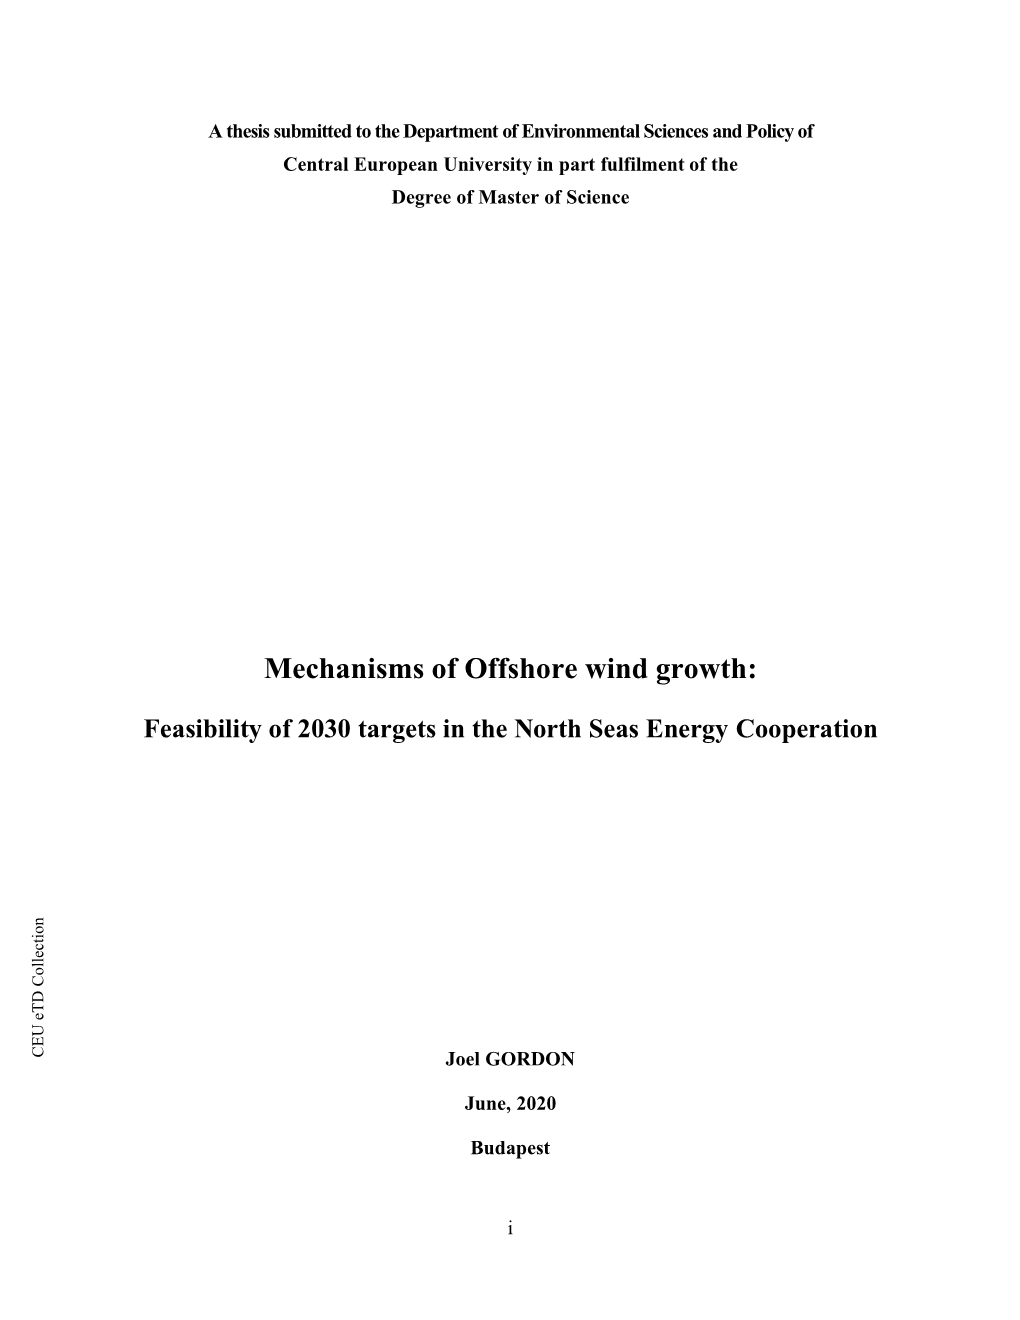 Mechanisms of Offshore Wind Growth